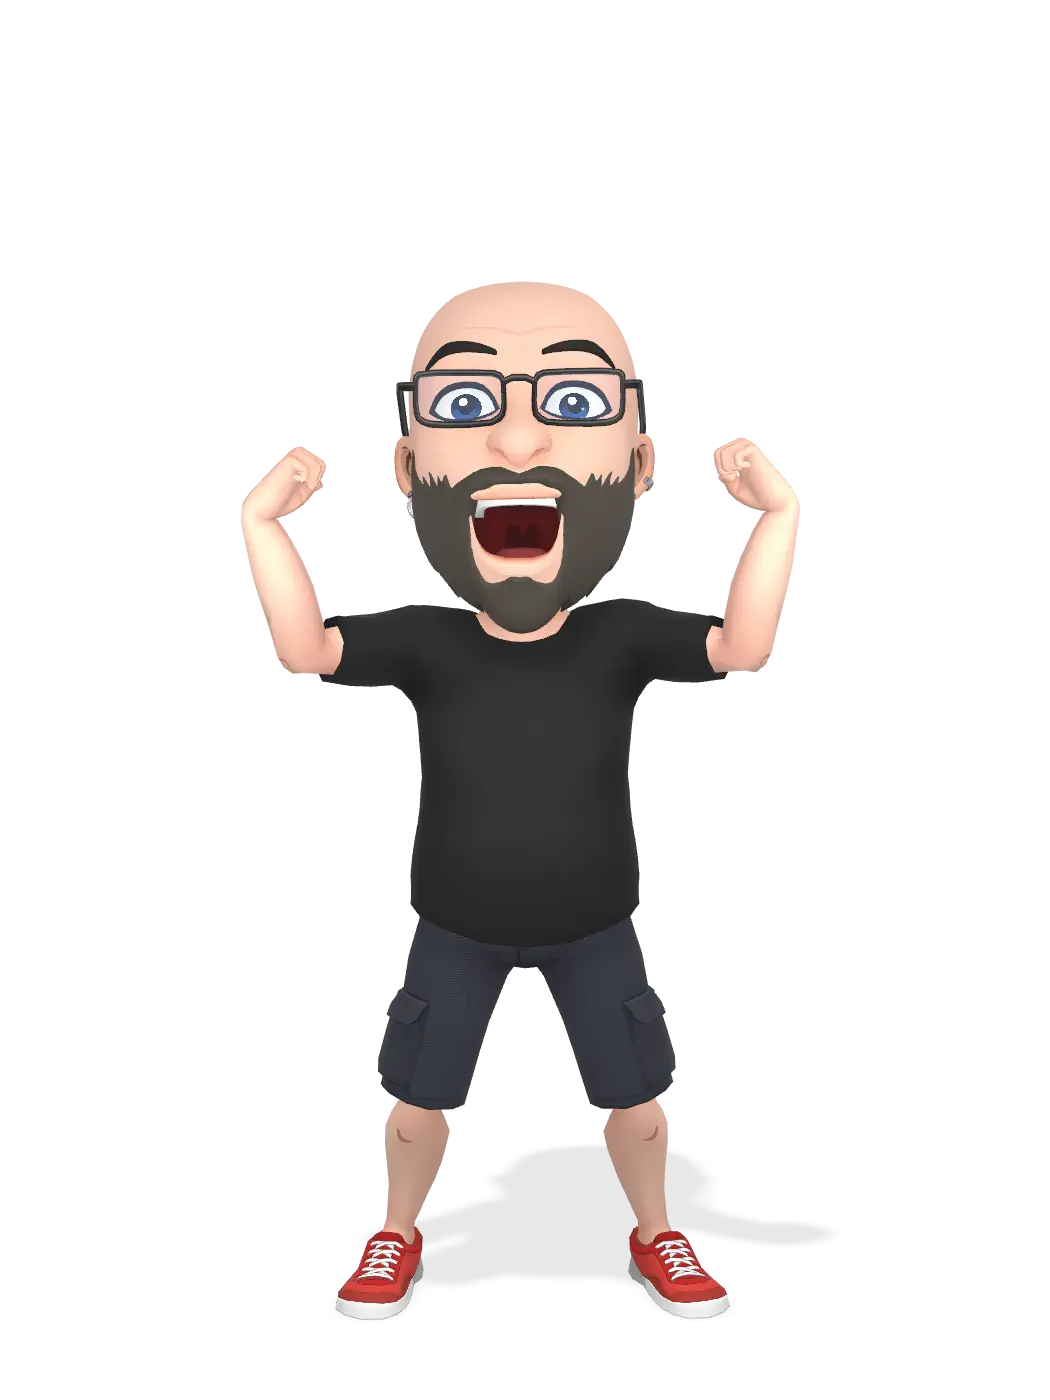 3D Bitmoji for angrypanzer